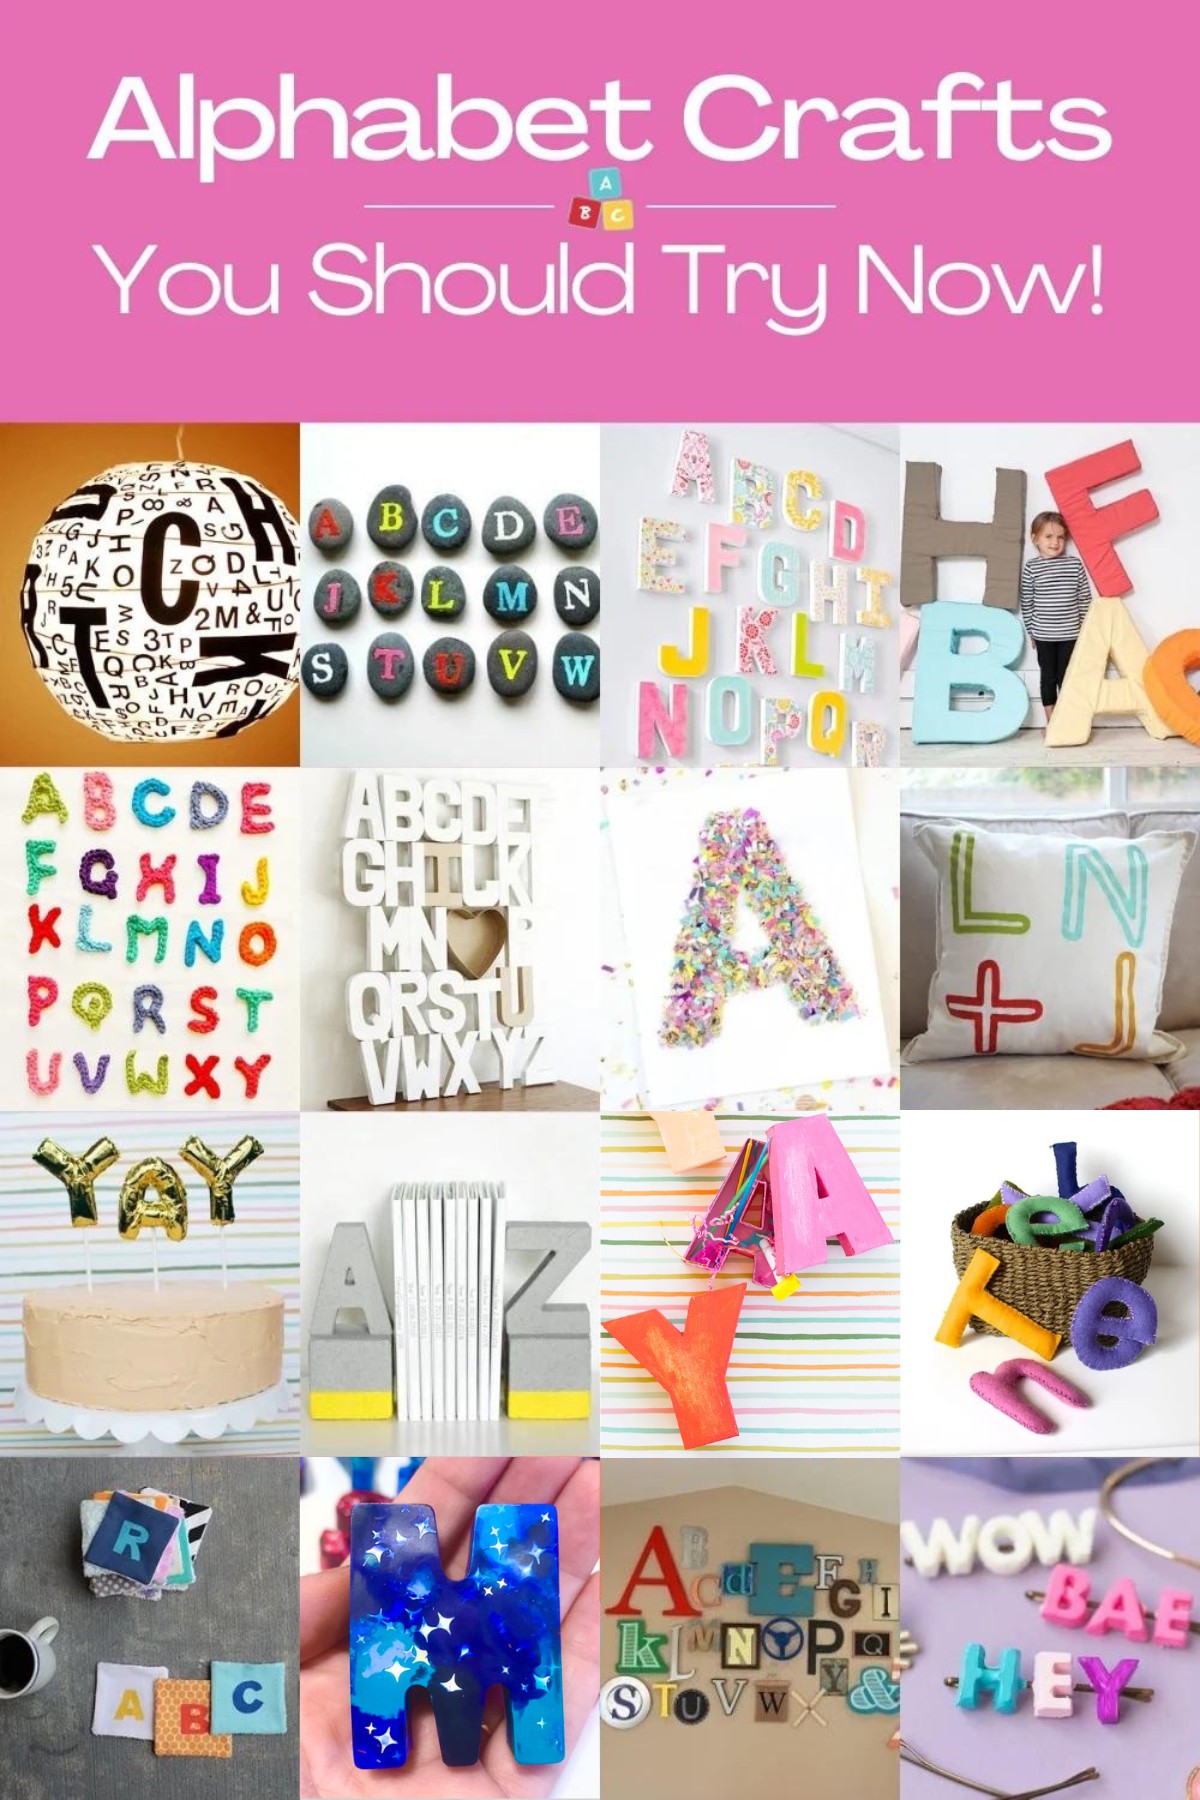 Alphabet Crafts You'll Want to Make Now